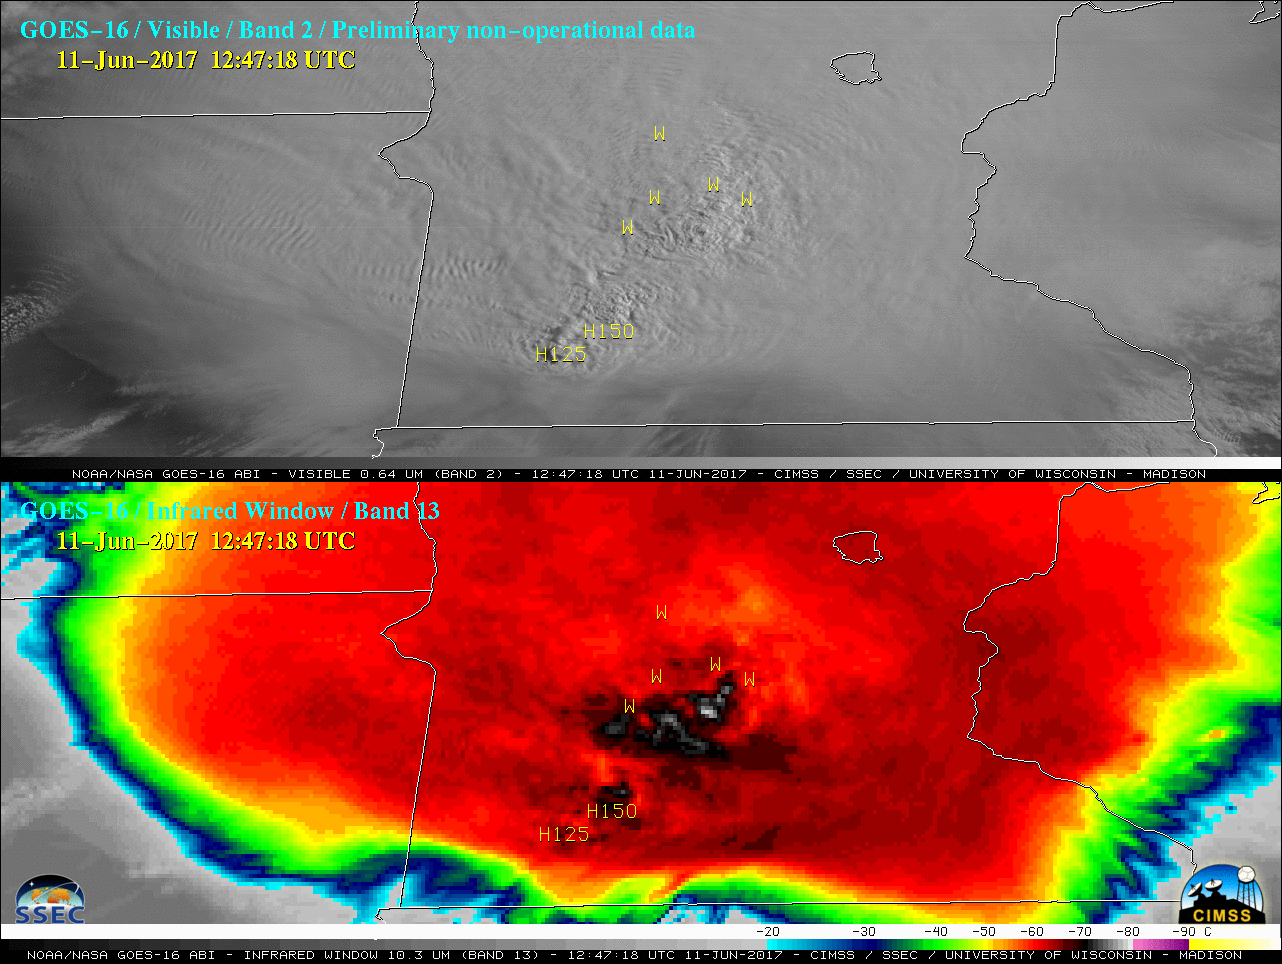 GOES-16 Visible (0.64 µm, top) and Infrared Window (10.3 µm, bottom), with SPC storm reports of hail and wind plotted in yellow [click to play animation]